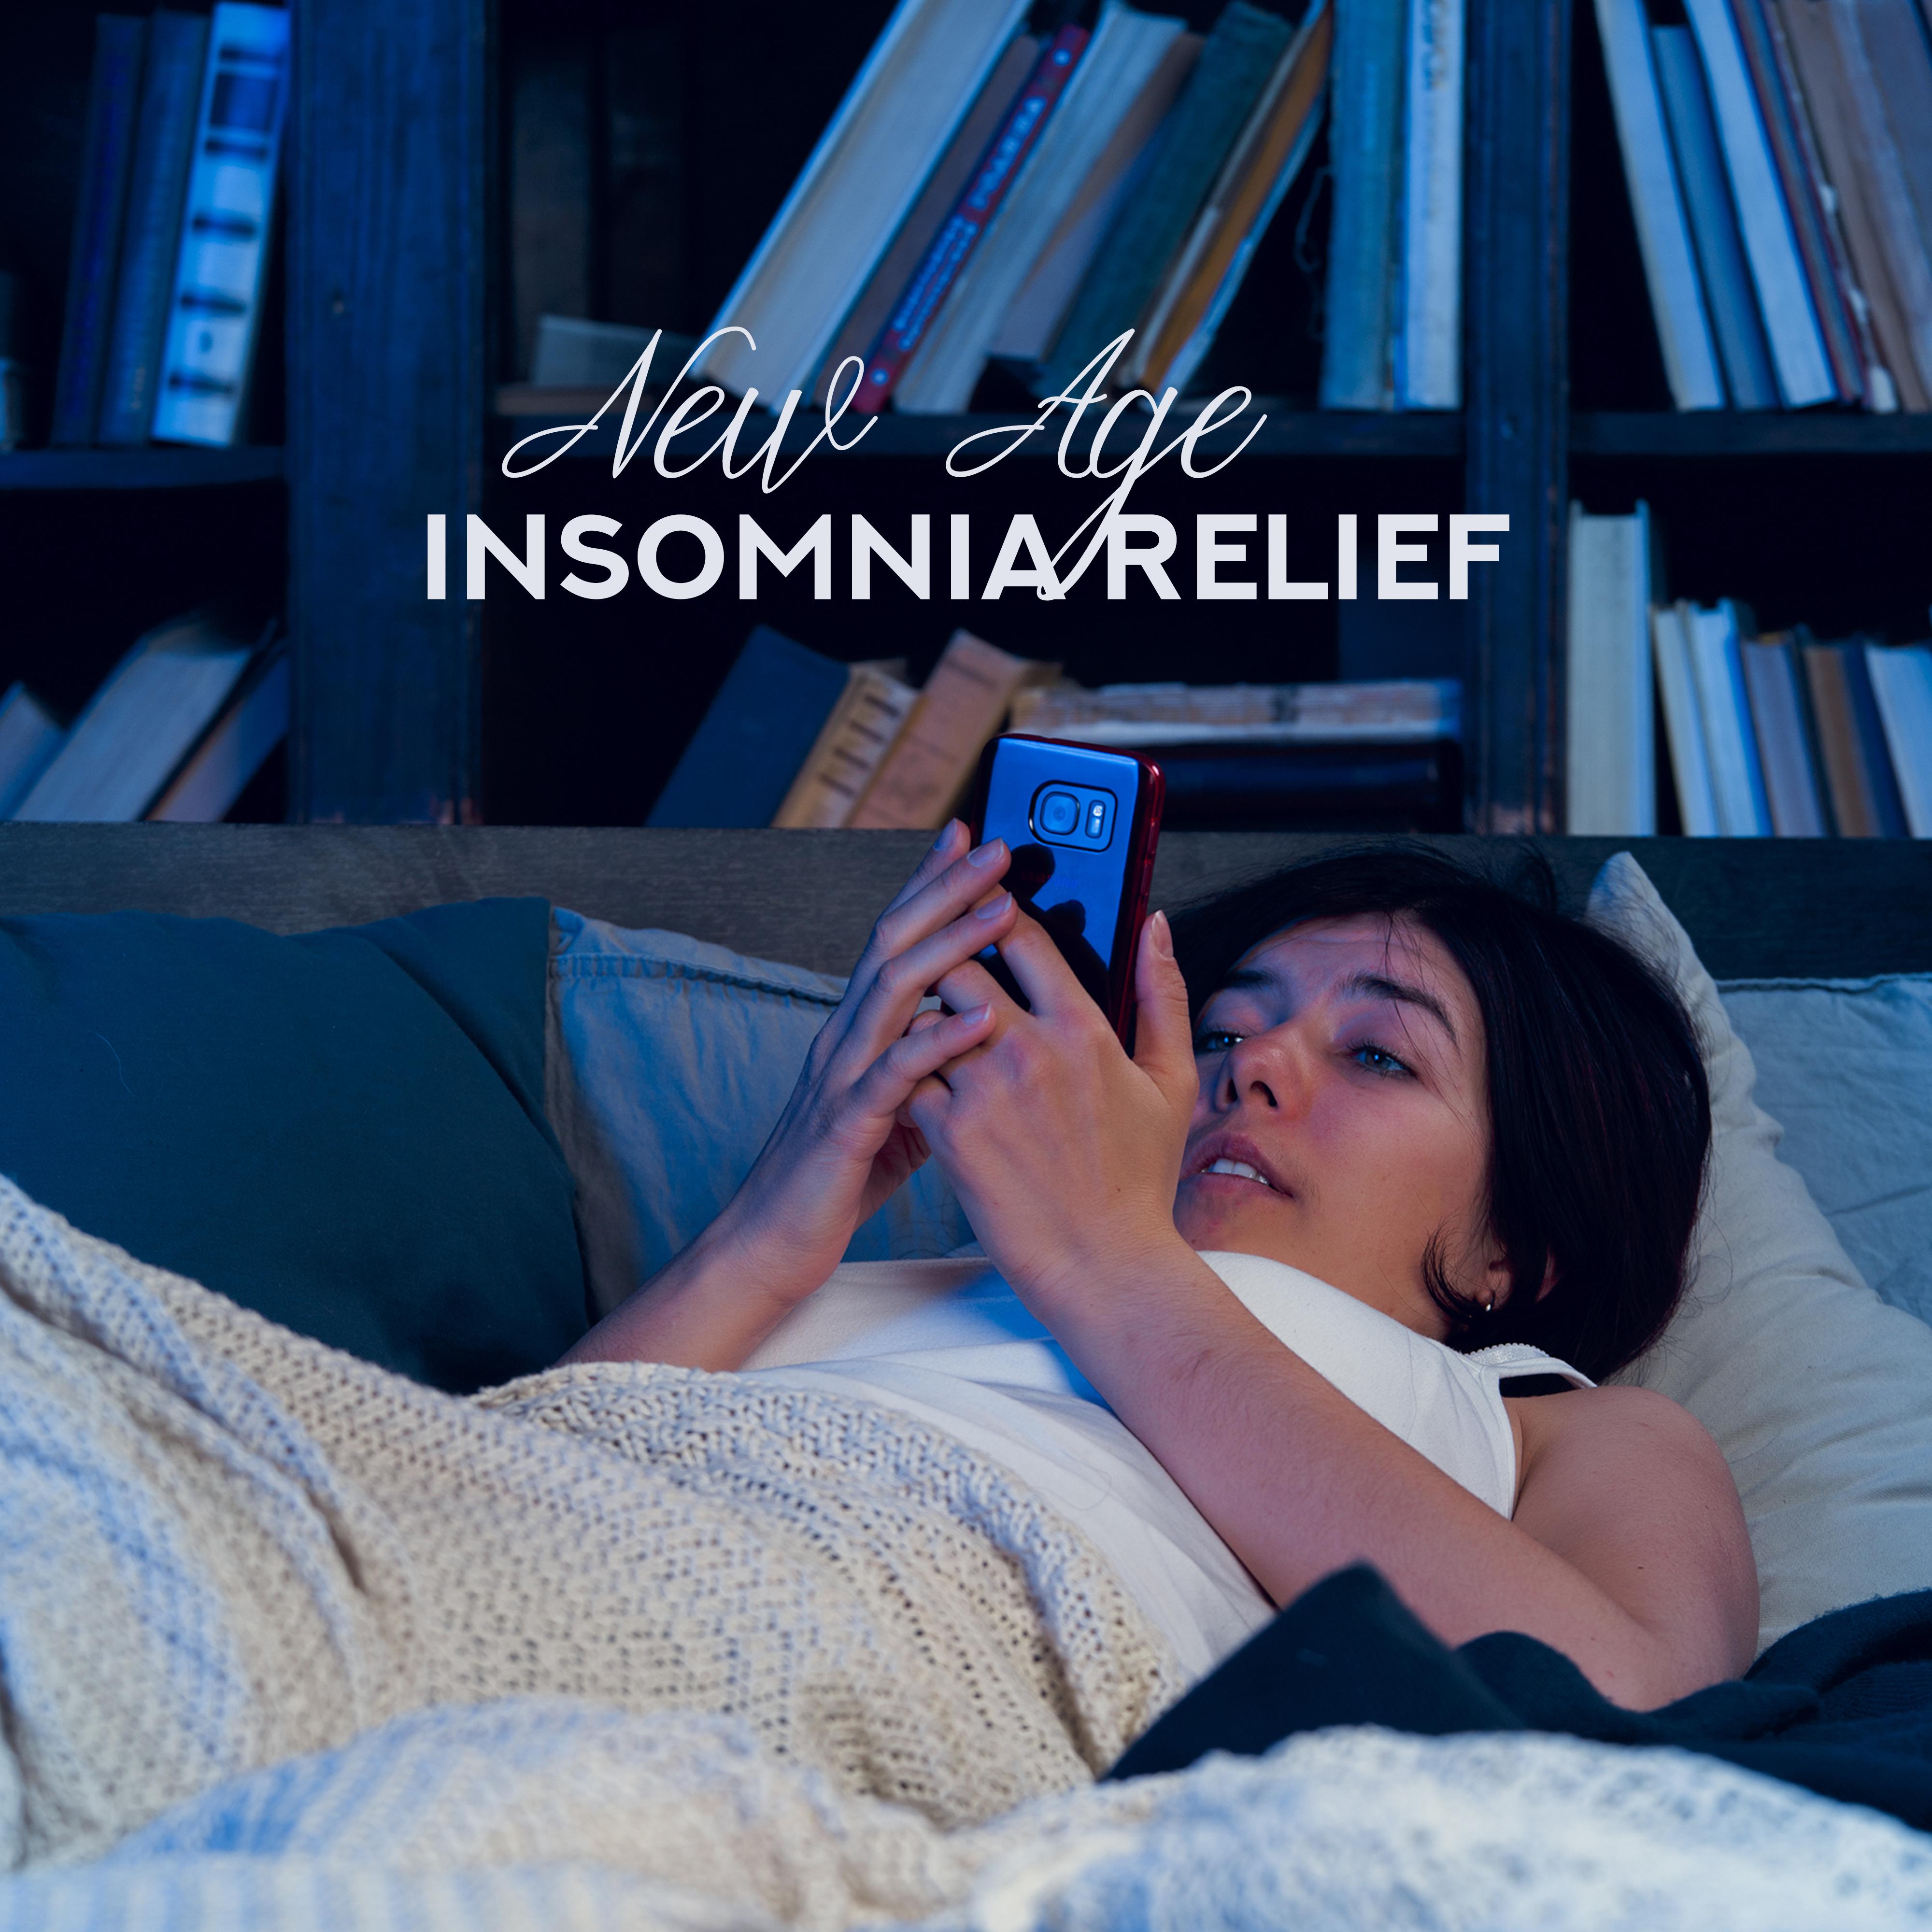 New Age Insomnia Relief – Peaceful Relaxation Music for Perfect Sleep